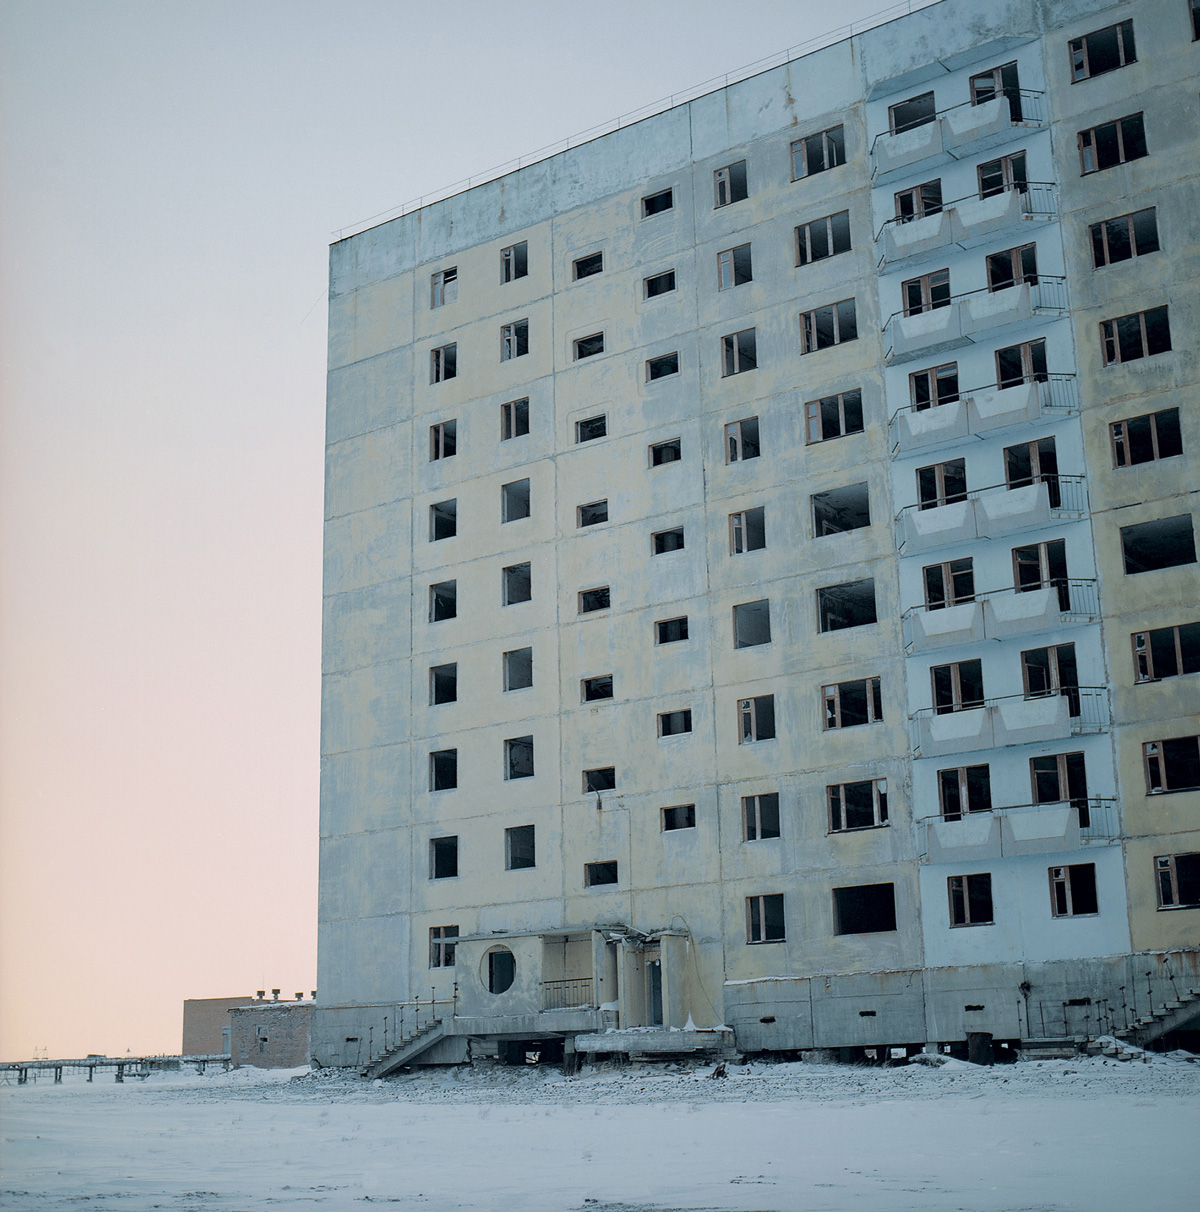 Apartment building in Norilsk, Northern Siberia.